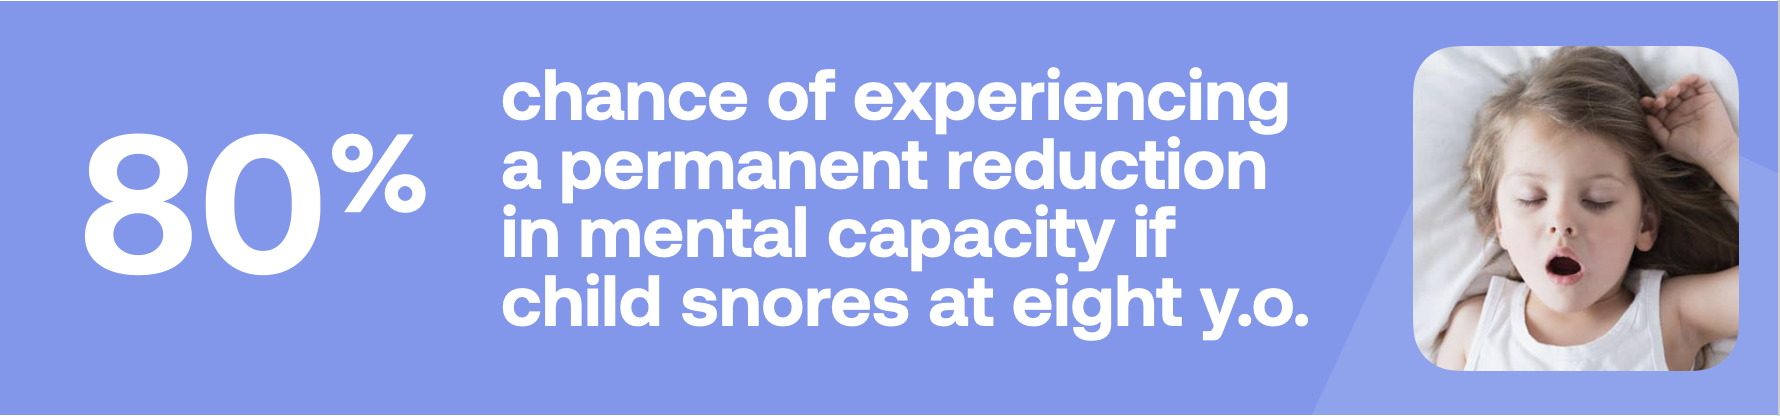 80% chance of experiencing a permanent reduction in mental capacity if child snores at eight y.o.